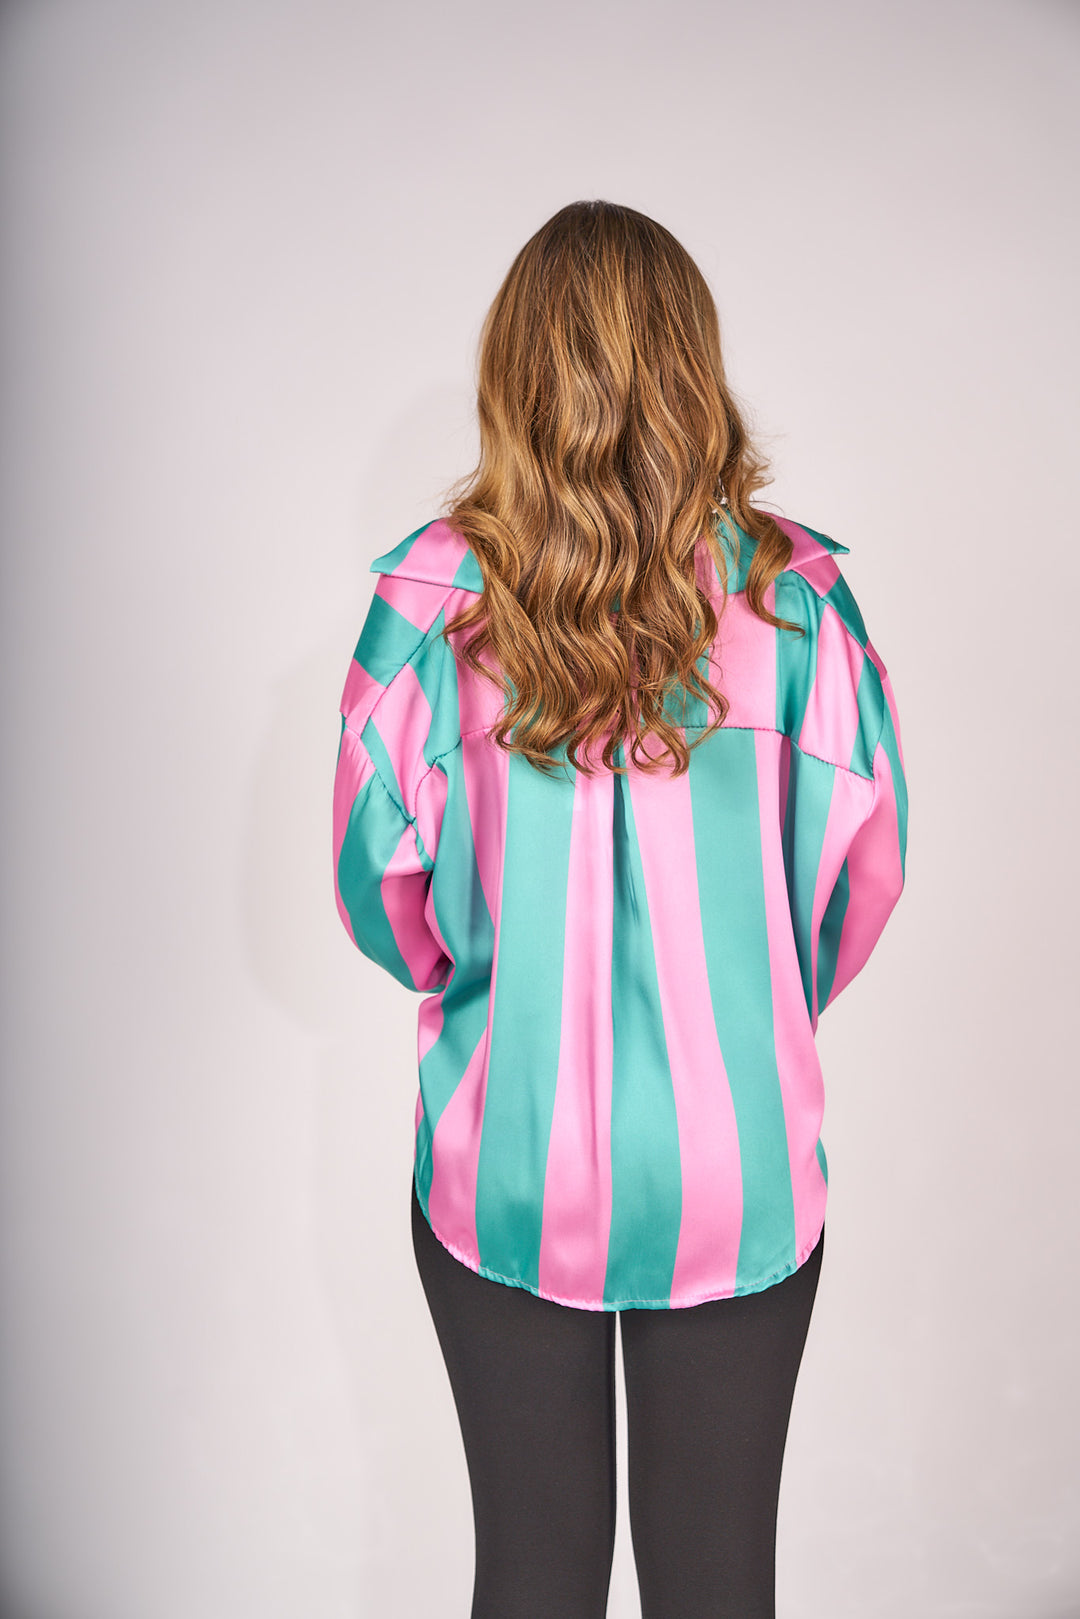 Knotted Satin Stripes Top